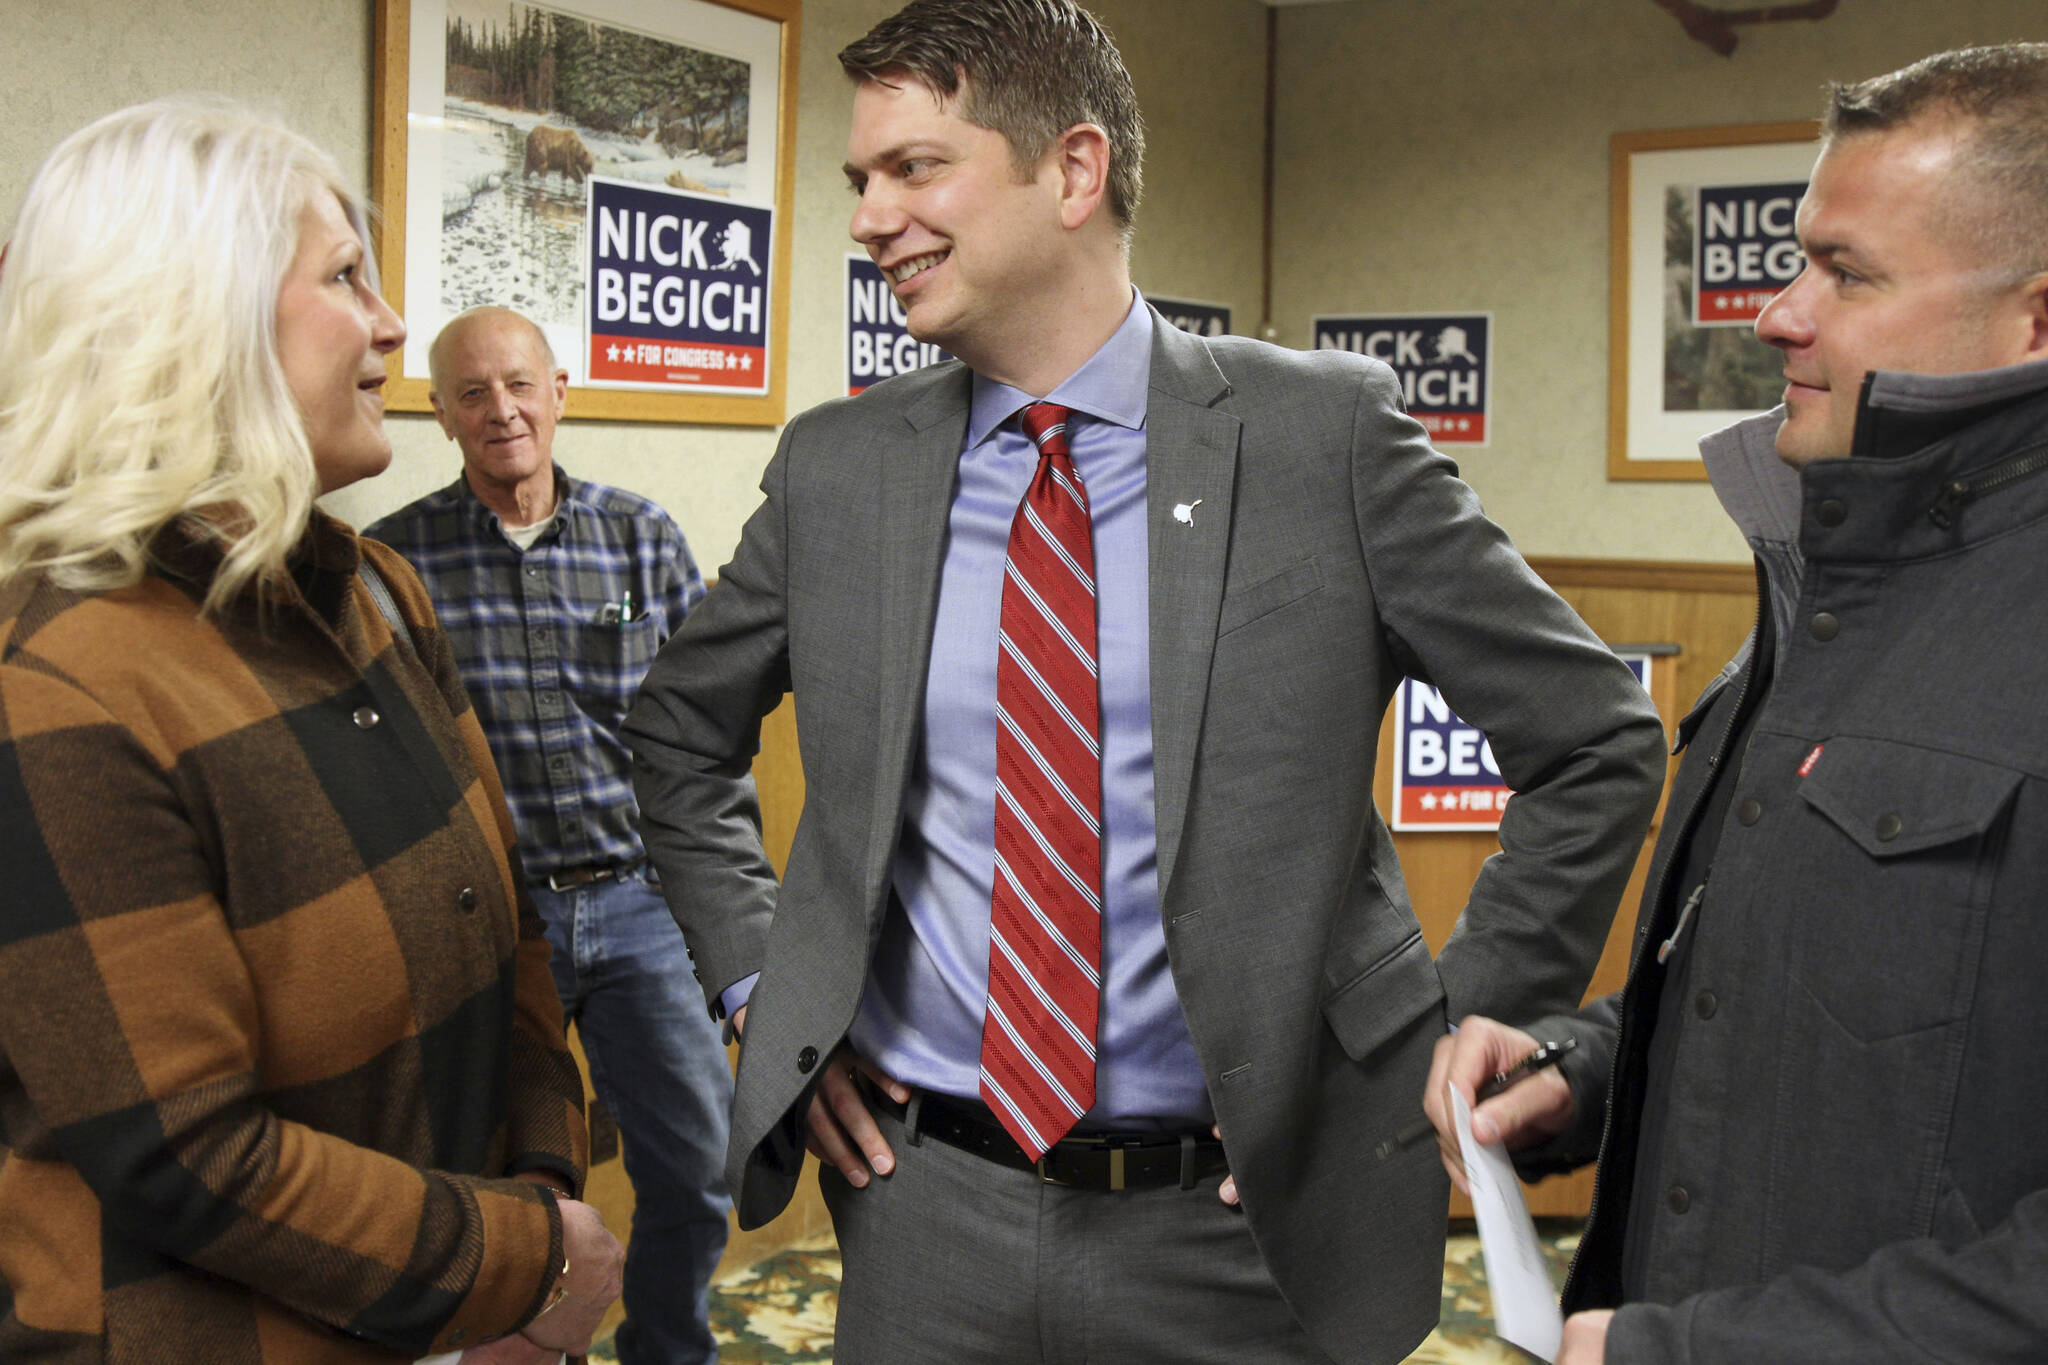 Nicholas Begich III, middle, speaks with supporters ahead of announcing his plans to run for Alaska’s lone U.S. House seat on Thursday, Oct. 28, 2021, in Wasilla, Alaska. Begich, a Republican, plans to run for the seat that has been held since 1973 by Republican Rep. Don Young. (AP Photo/Mark Thiessen)